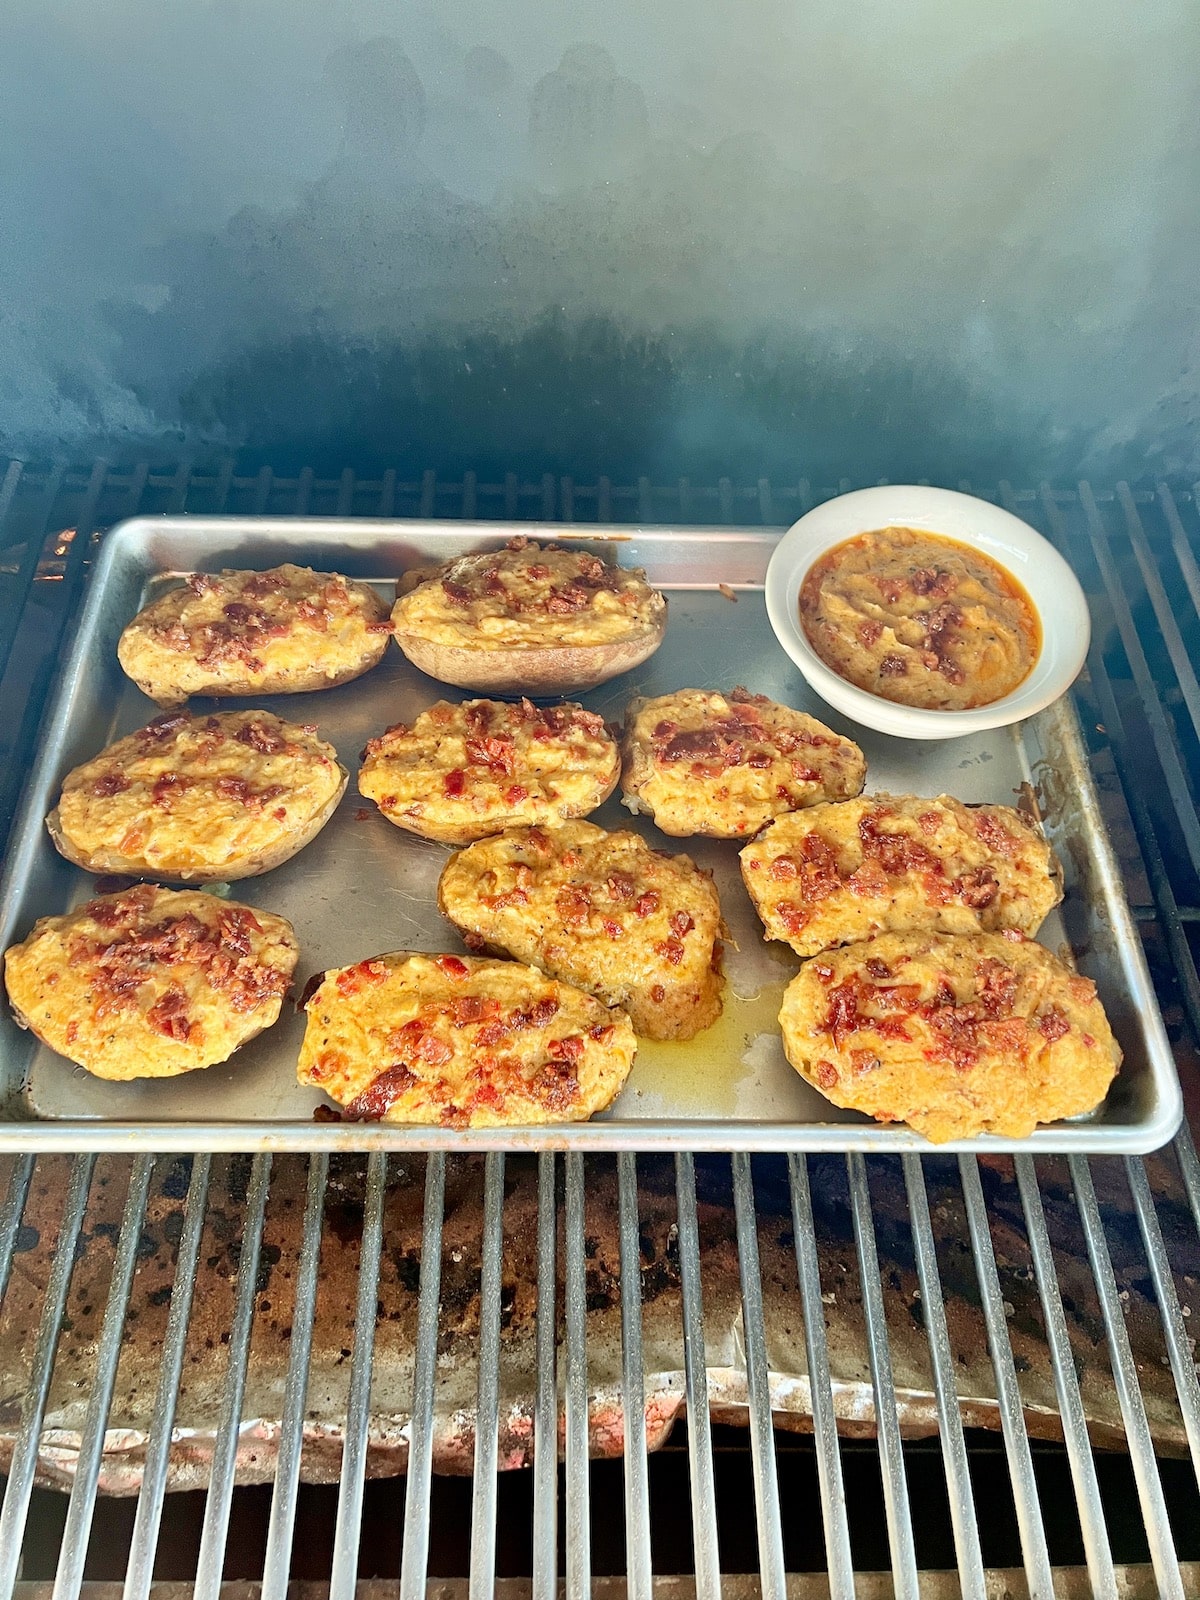 Twice baked potatoes on the grill.